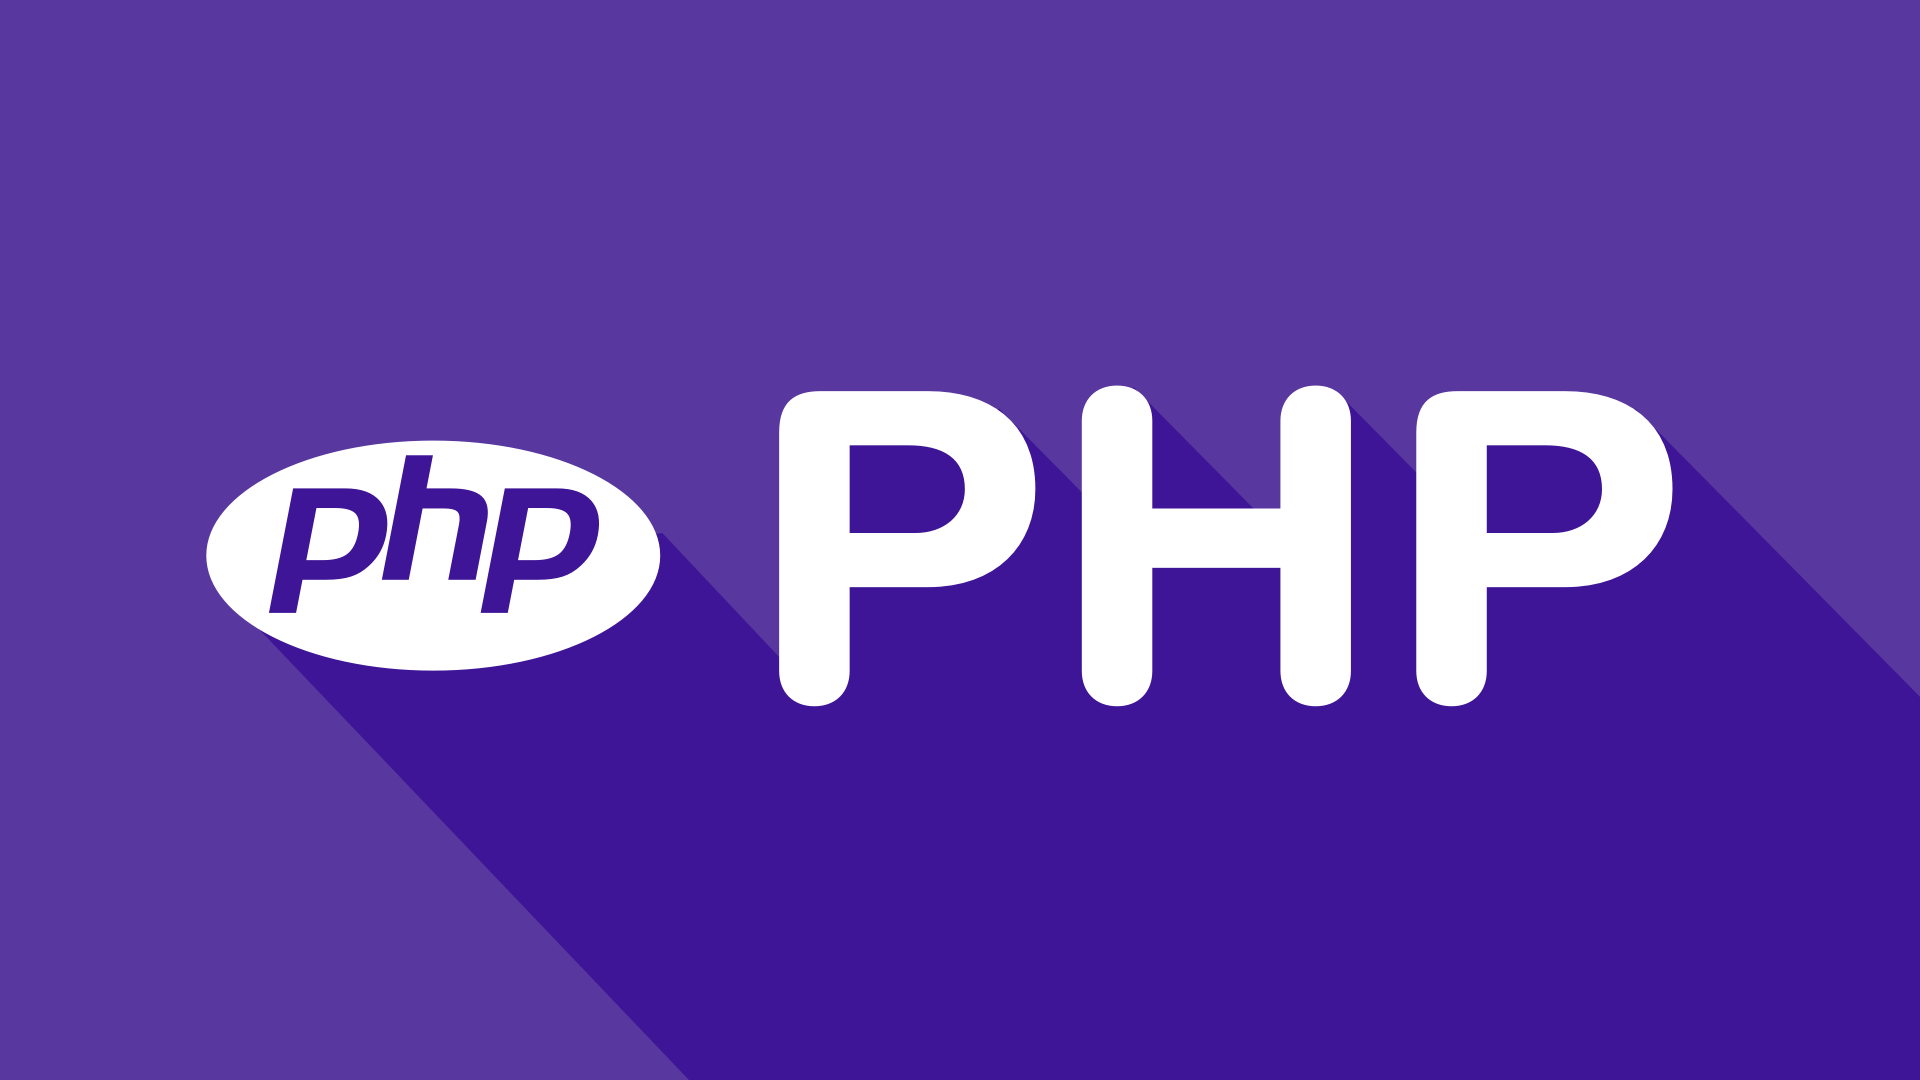 Should we learn PHP web programming language?